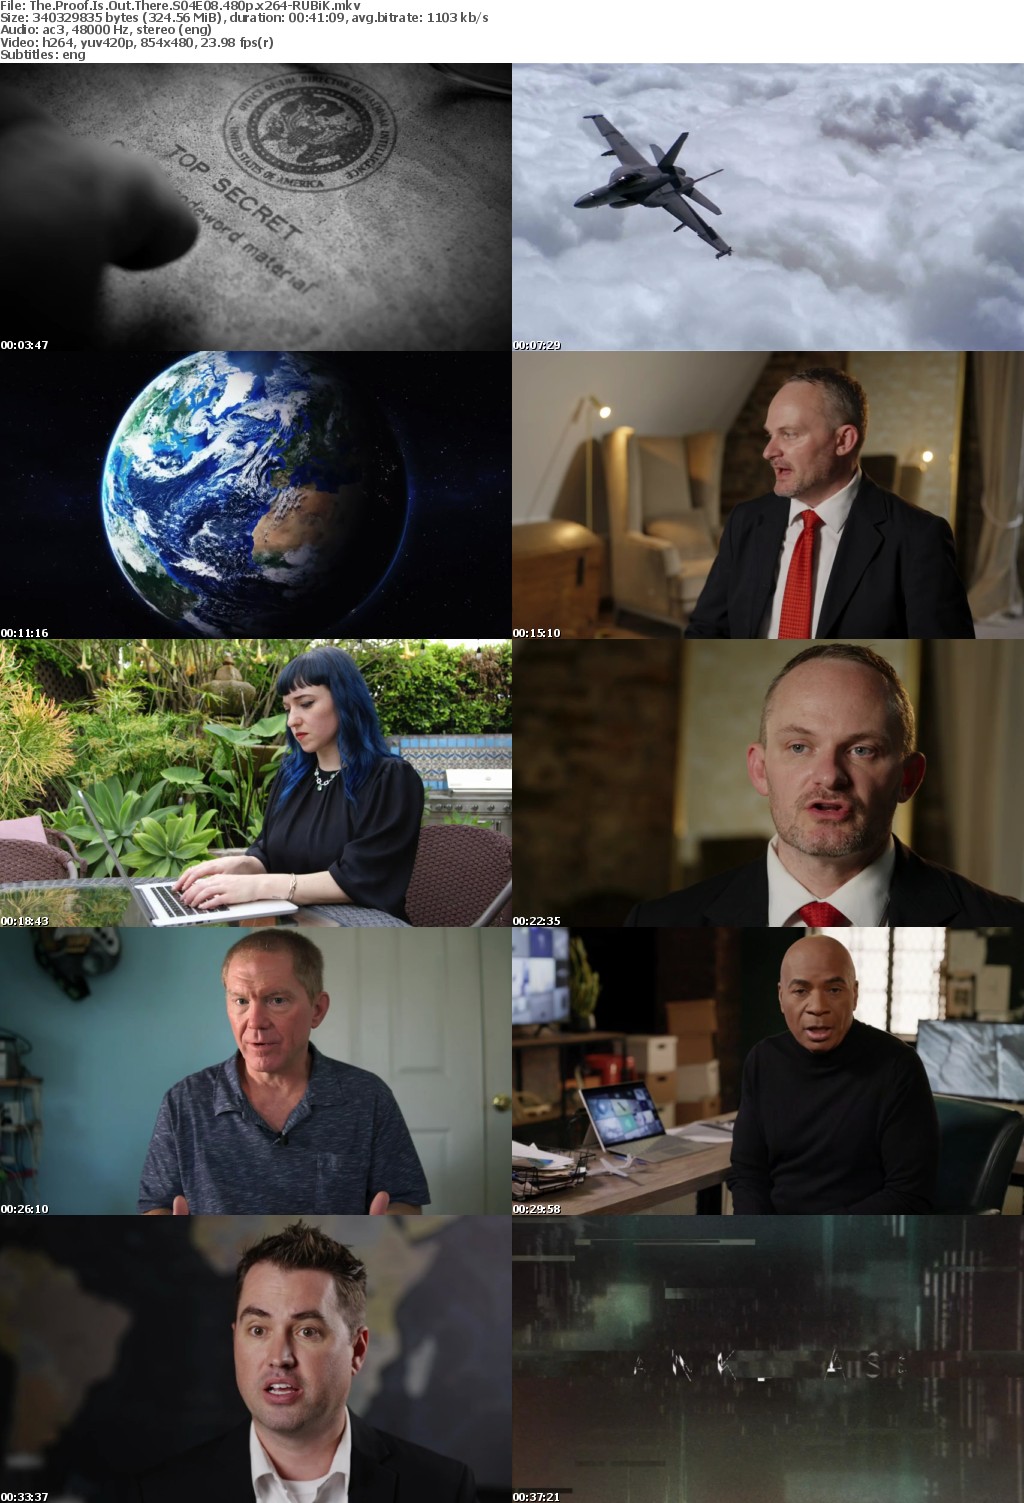 The Proof Is Out There S04E08 480p x264-RUBiK Saturn5